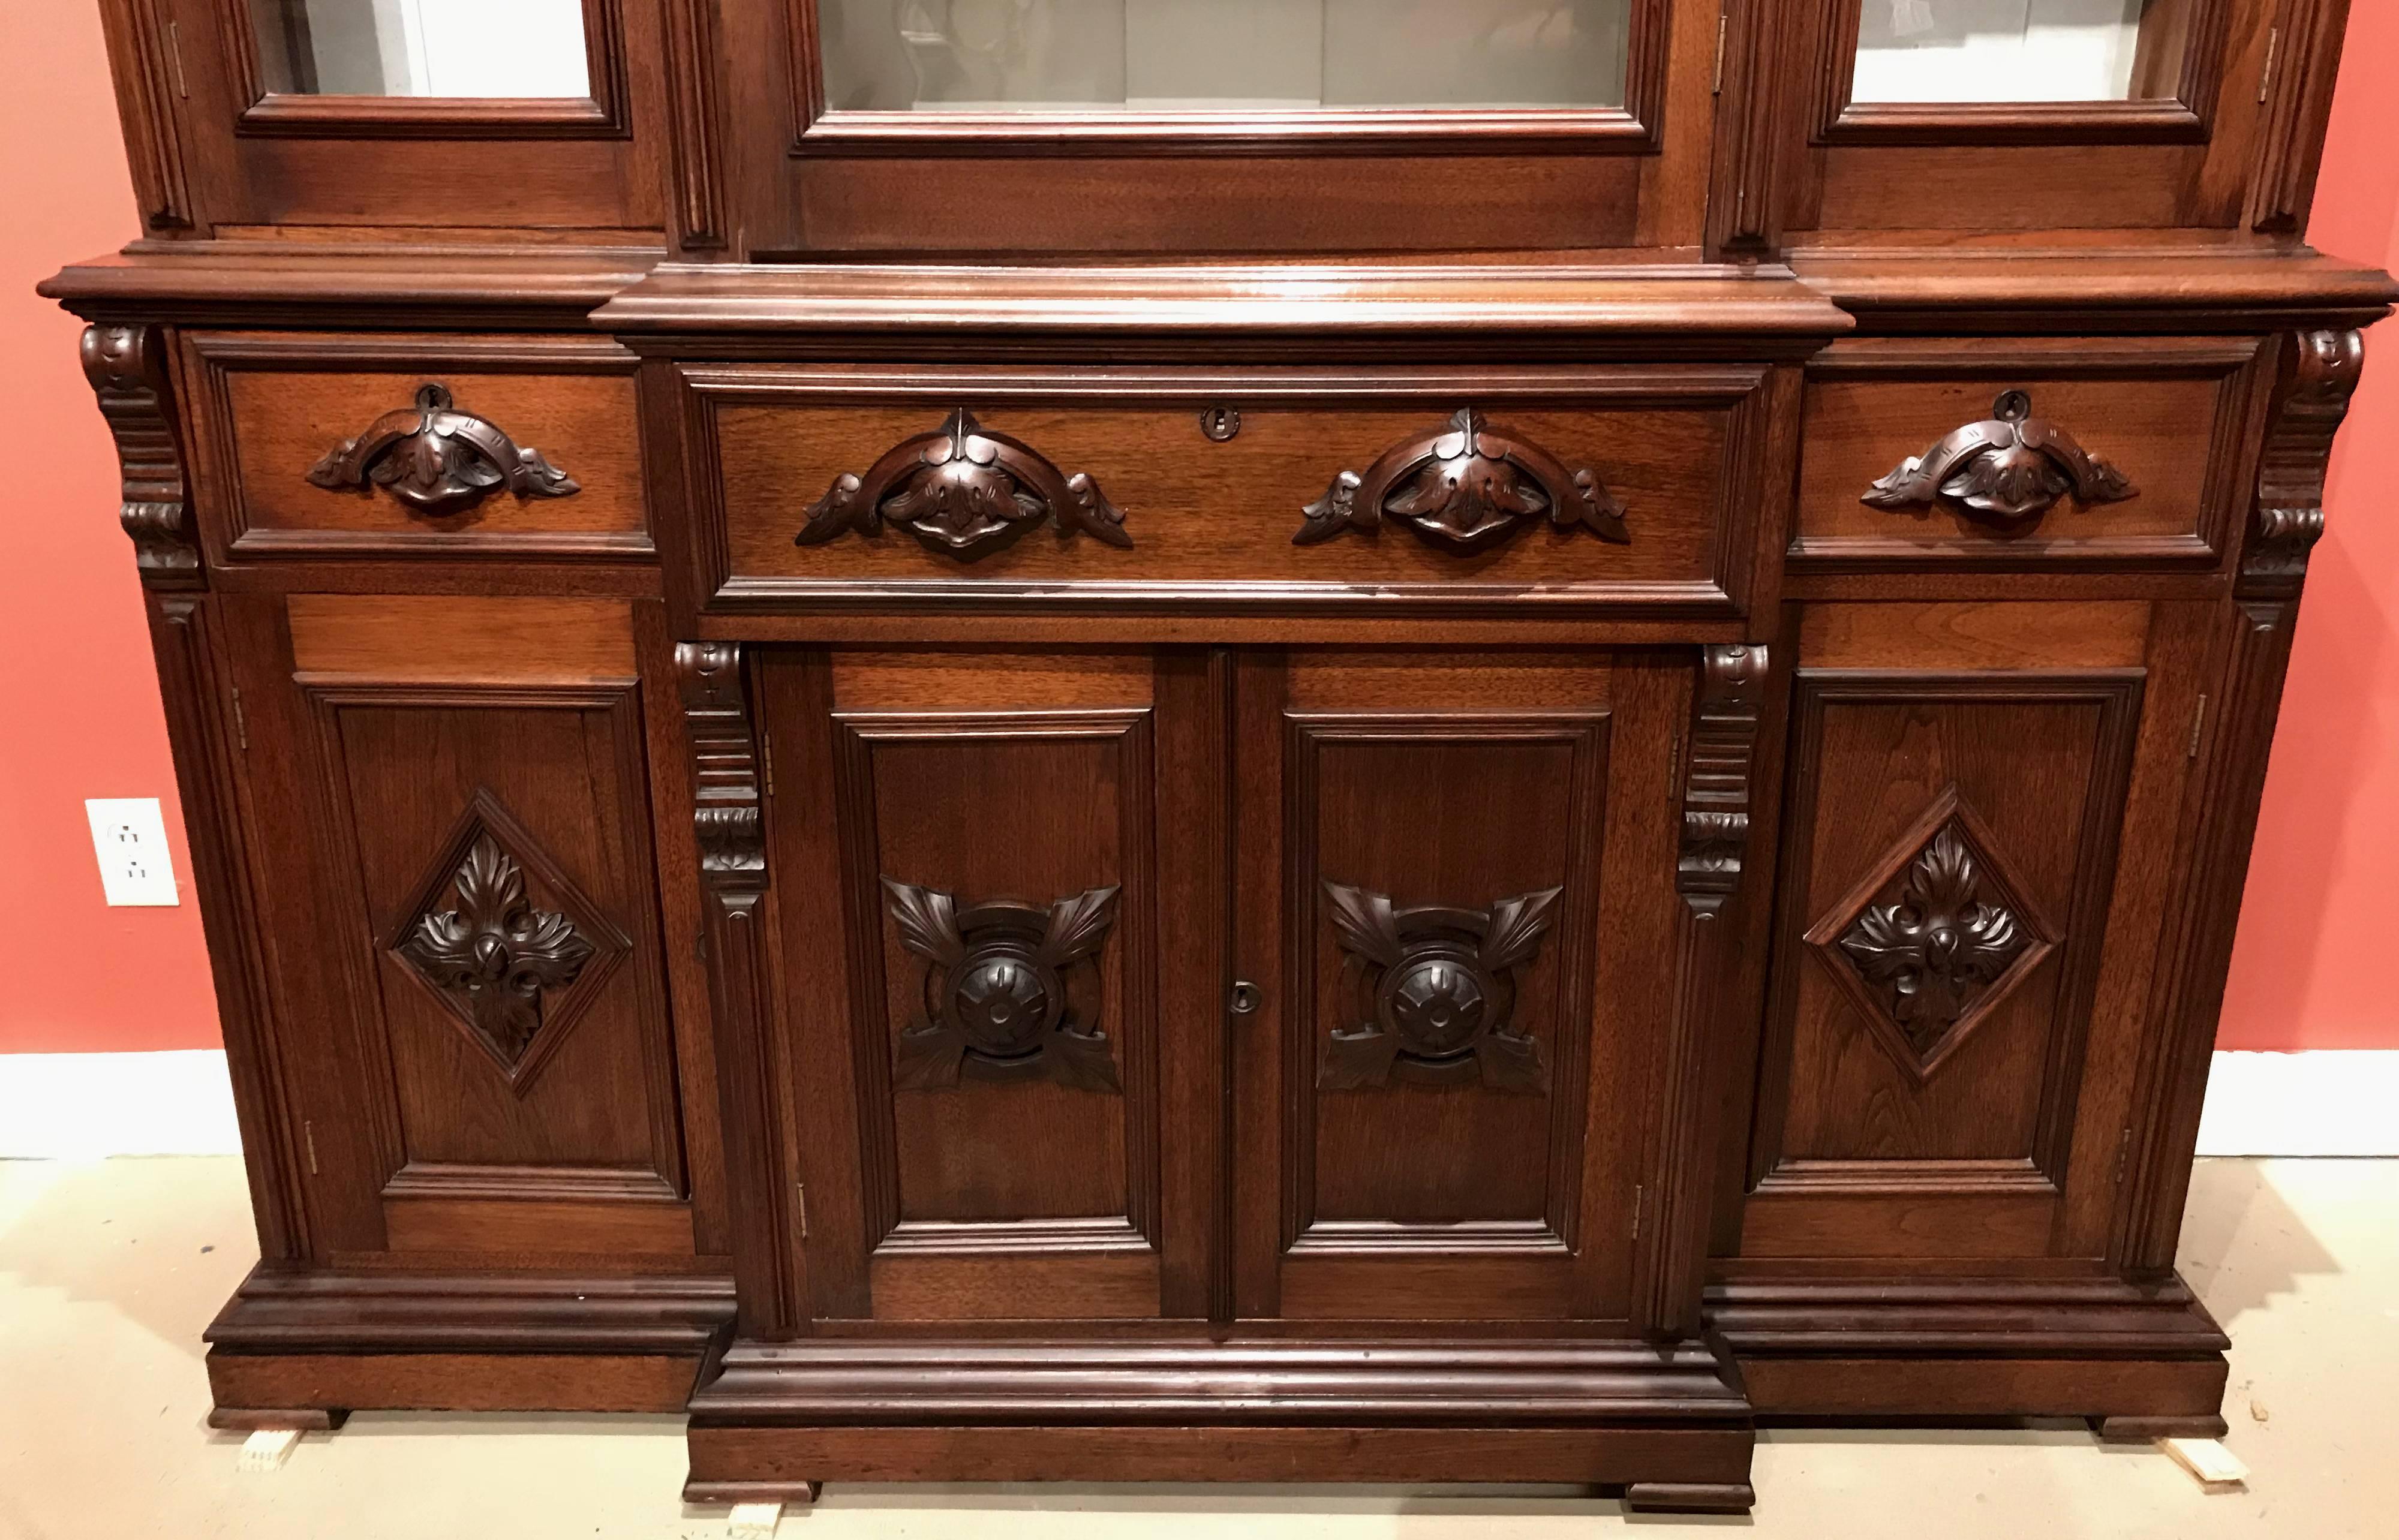 A fine Renaissance Revival Victorian two part walnut cabinet, its upper bookcase section with three glazed glass doors with molded surrounds and centre carved crest decorations, which open to a painted white interior with three adjustable